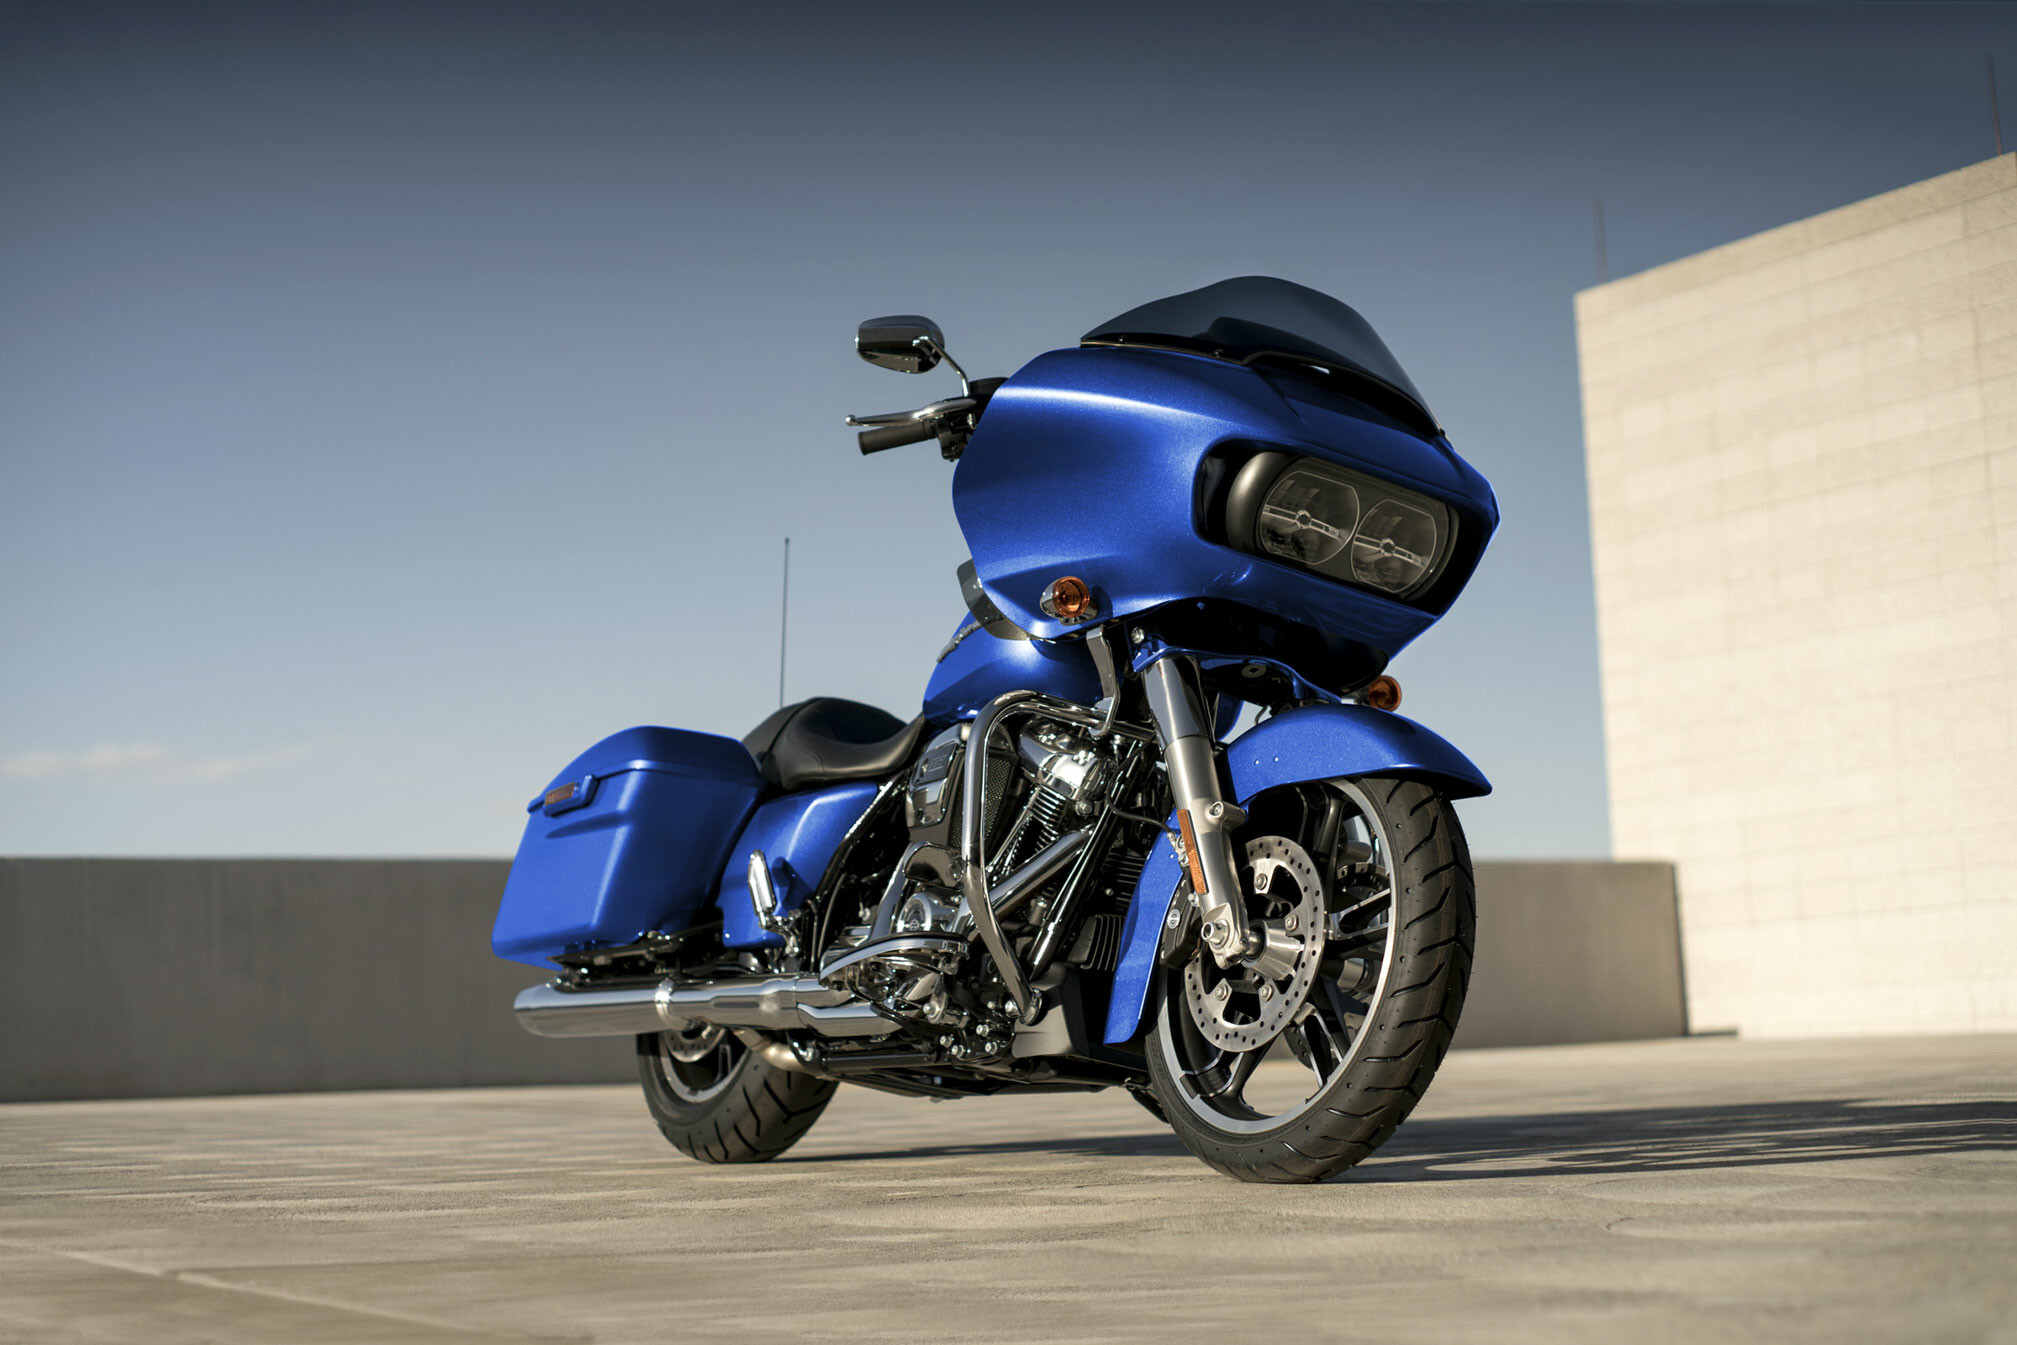 Harley-Davidson Glide: 2017 H-D Road Glide model, Introduced an updated frame mounted Tour Glide fairing. 2020x1350 HD Wallpaper.